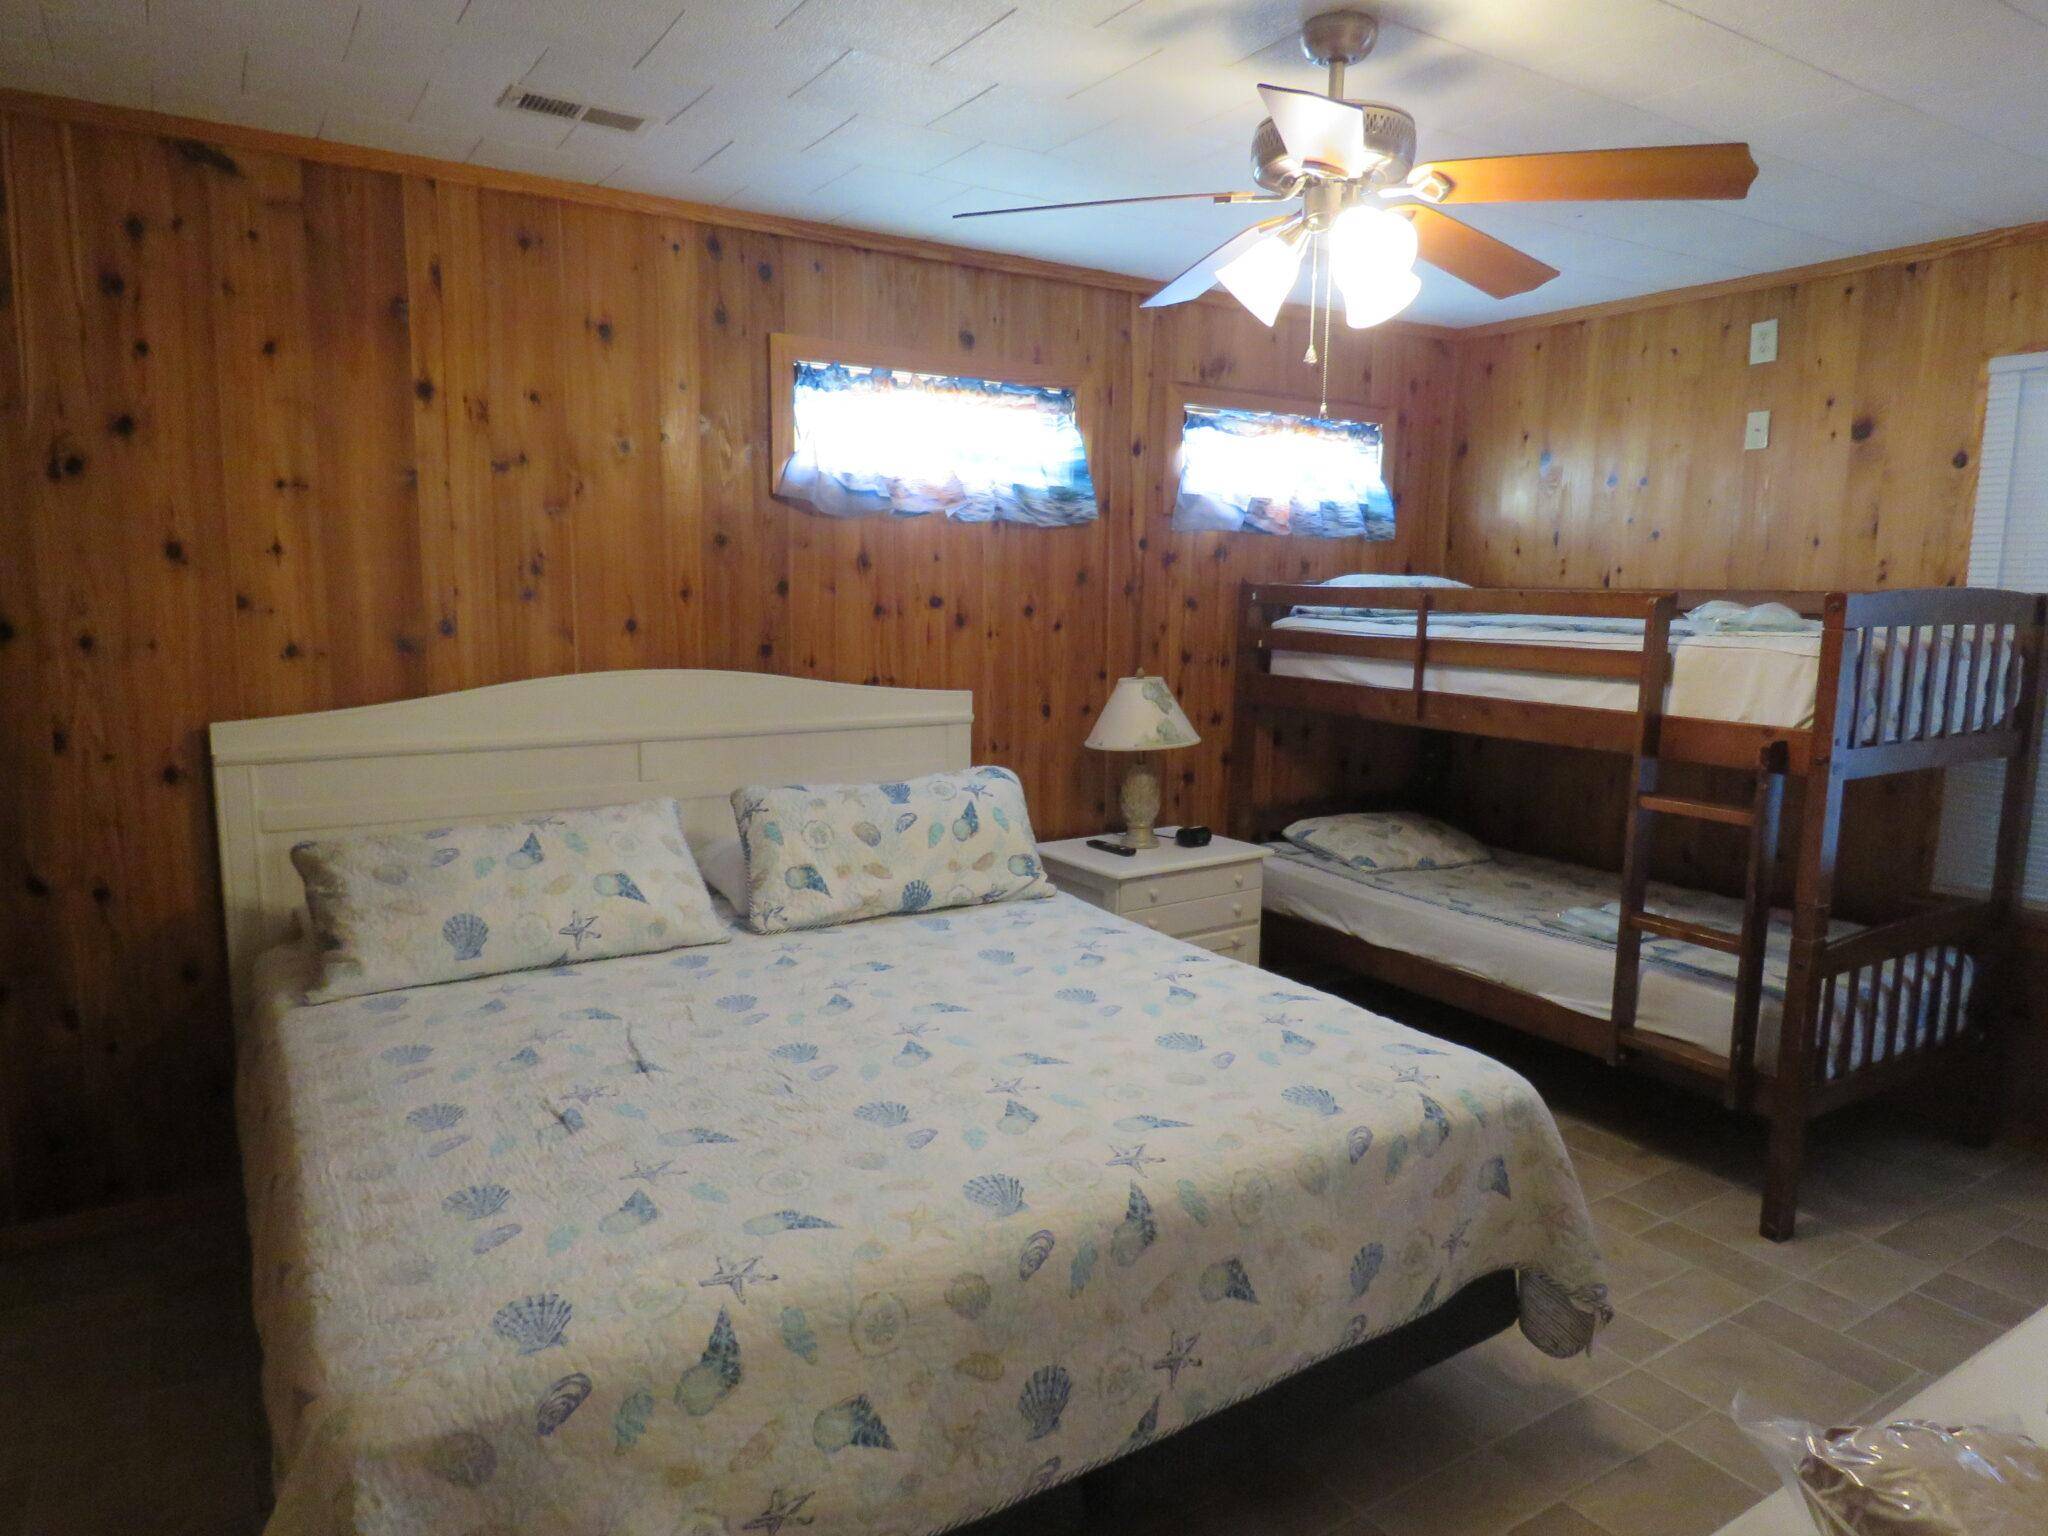 Second Floor Master Bedroom with King and Bunk Beds